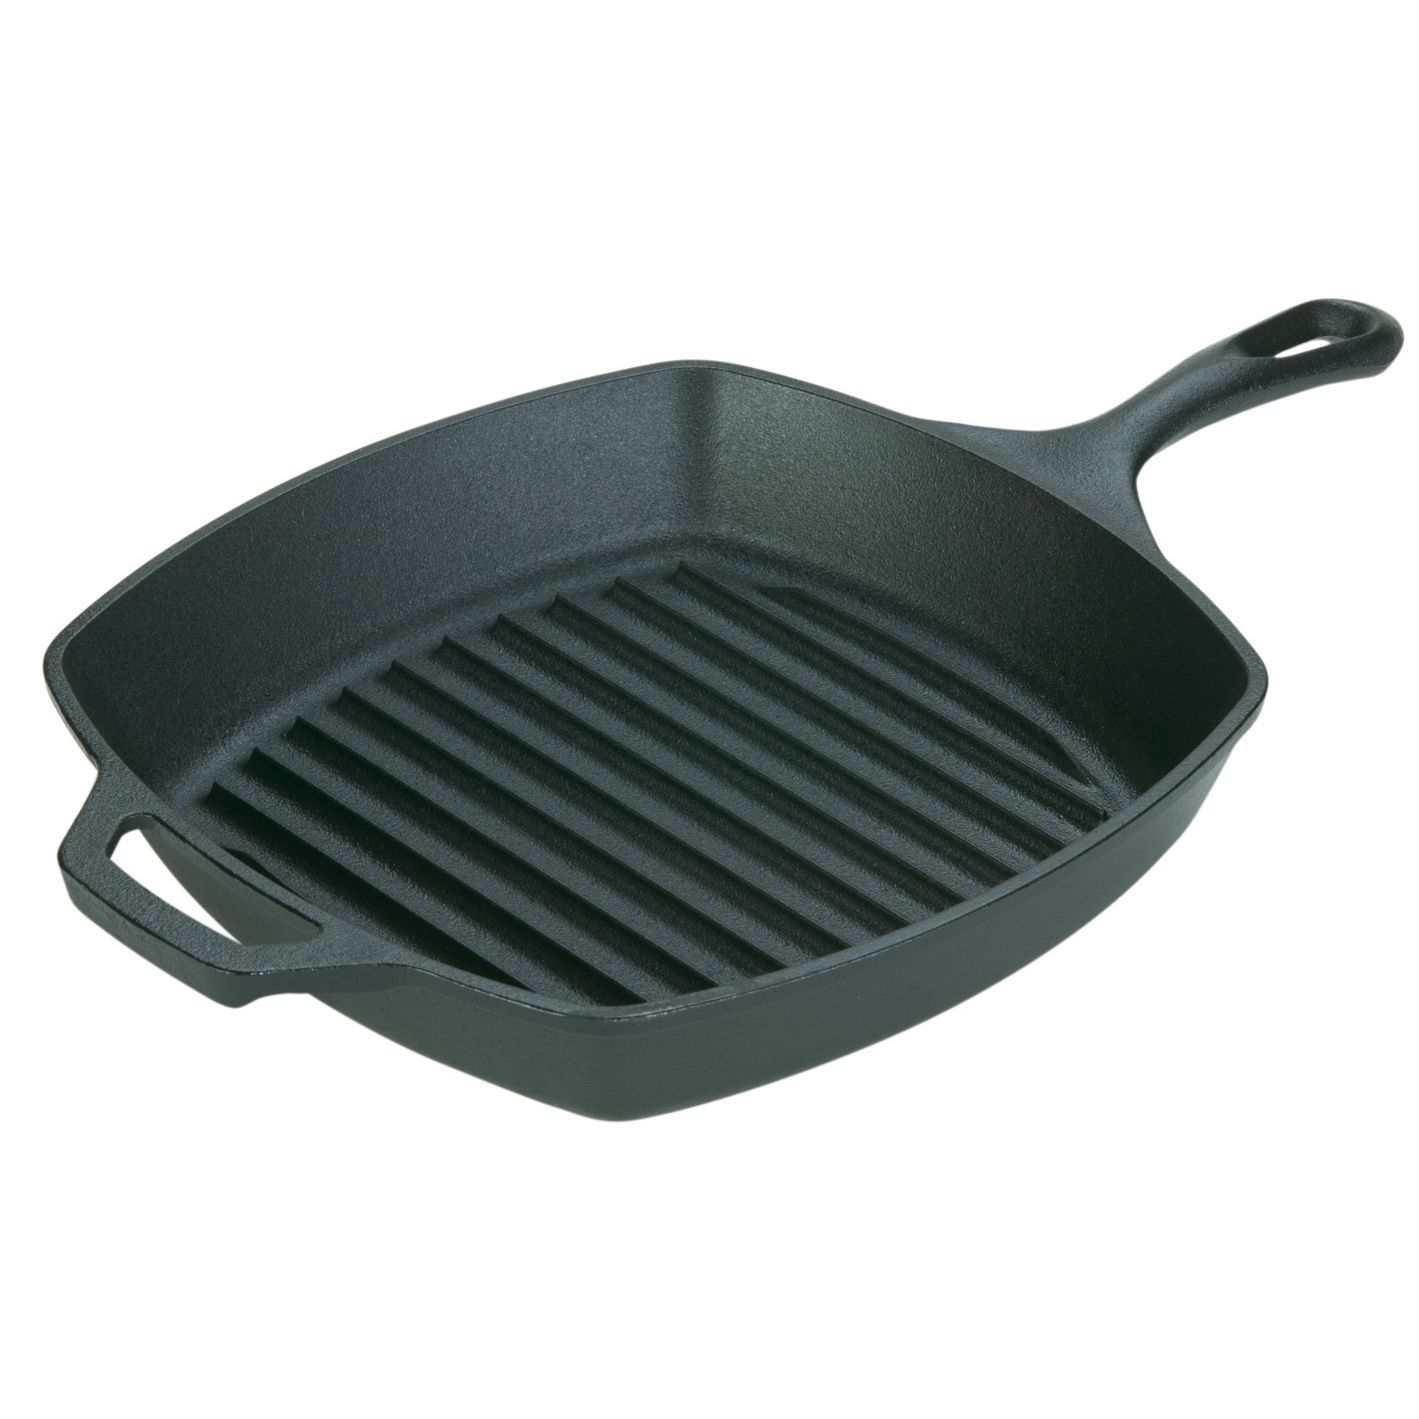 Lodge Pre-seasoned 10.5 inch Cast Iron Grill Pan with Assist Handle | Walmart (US)